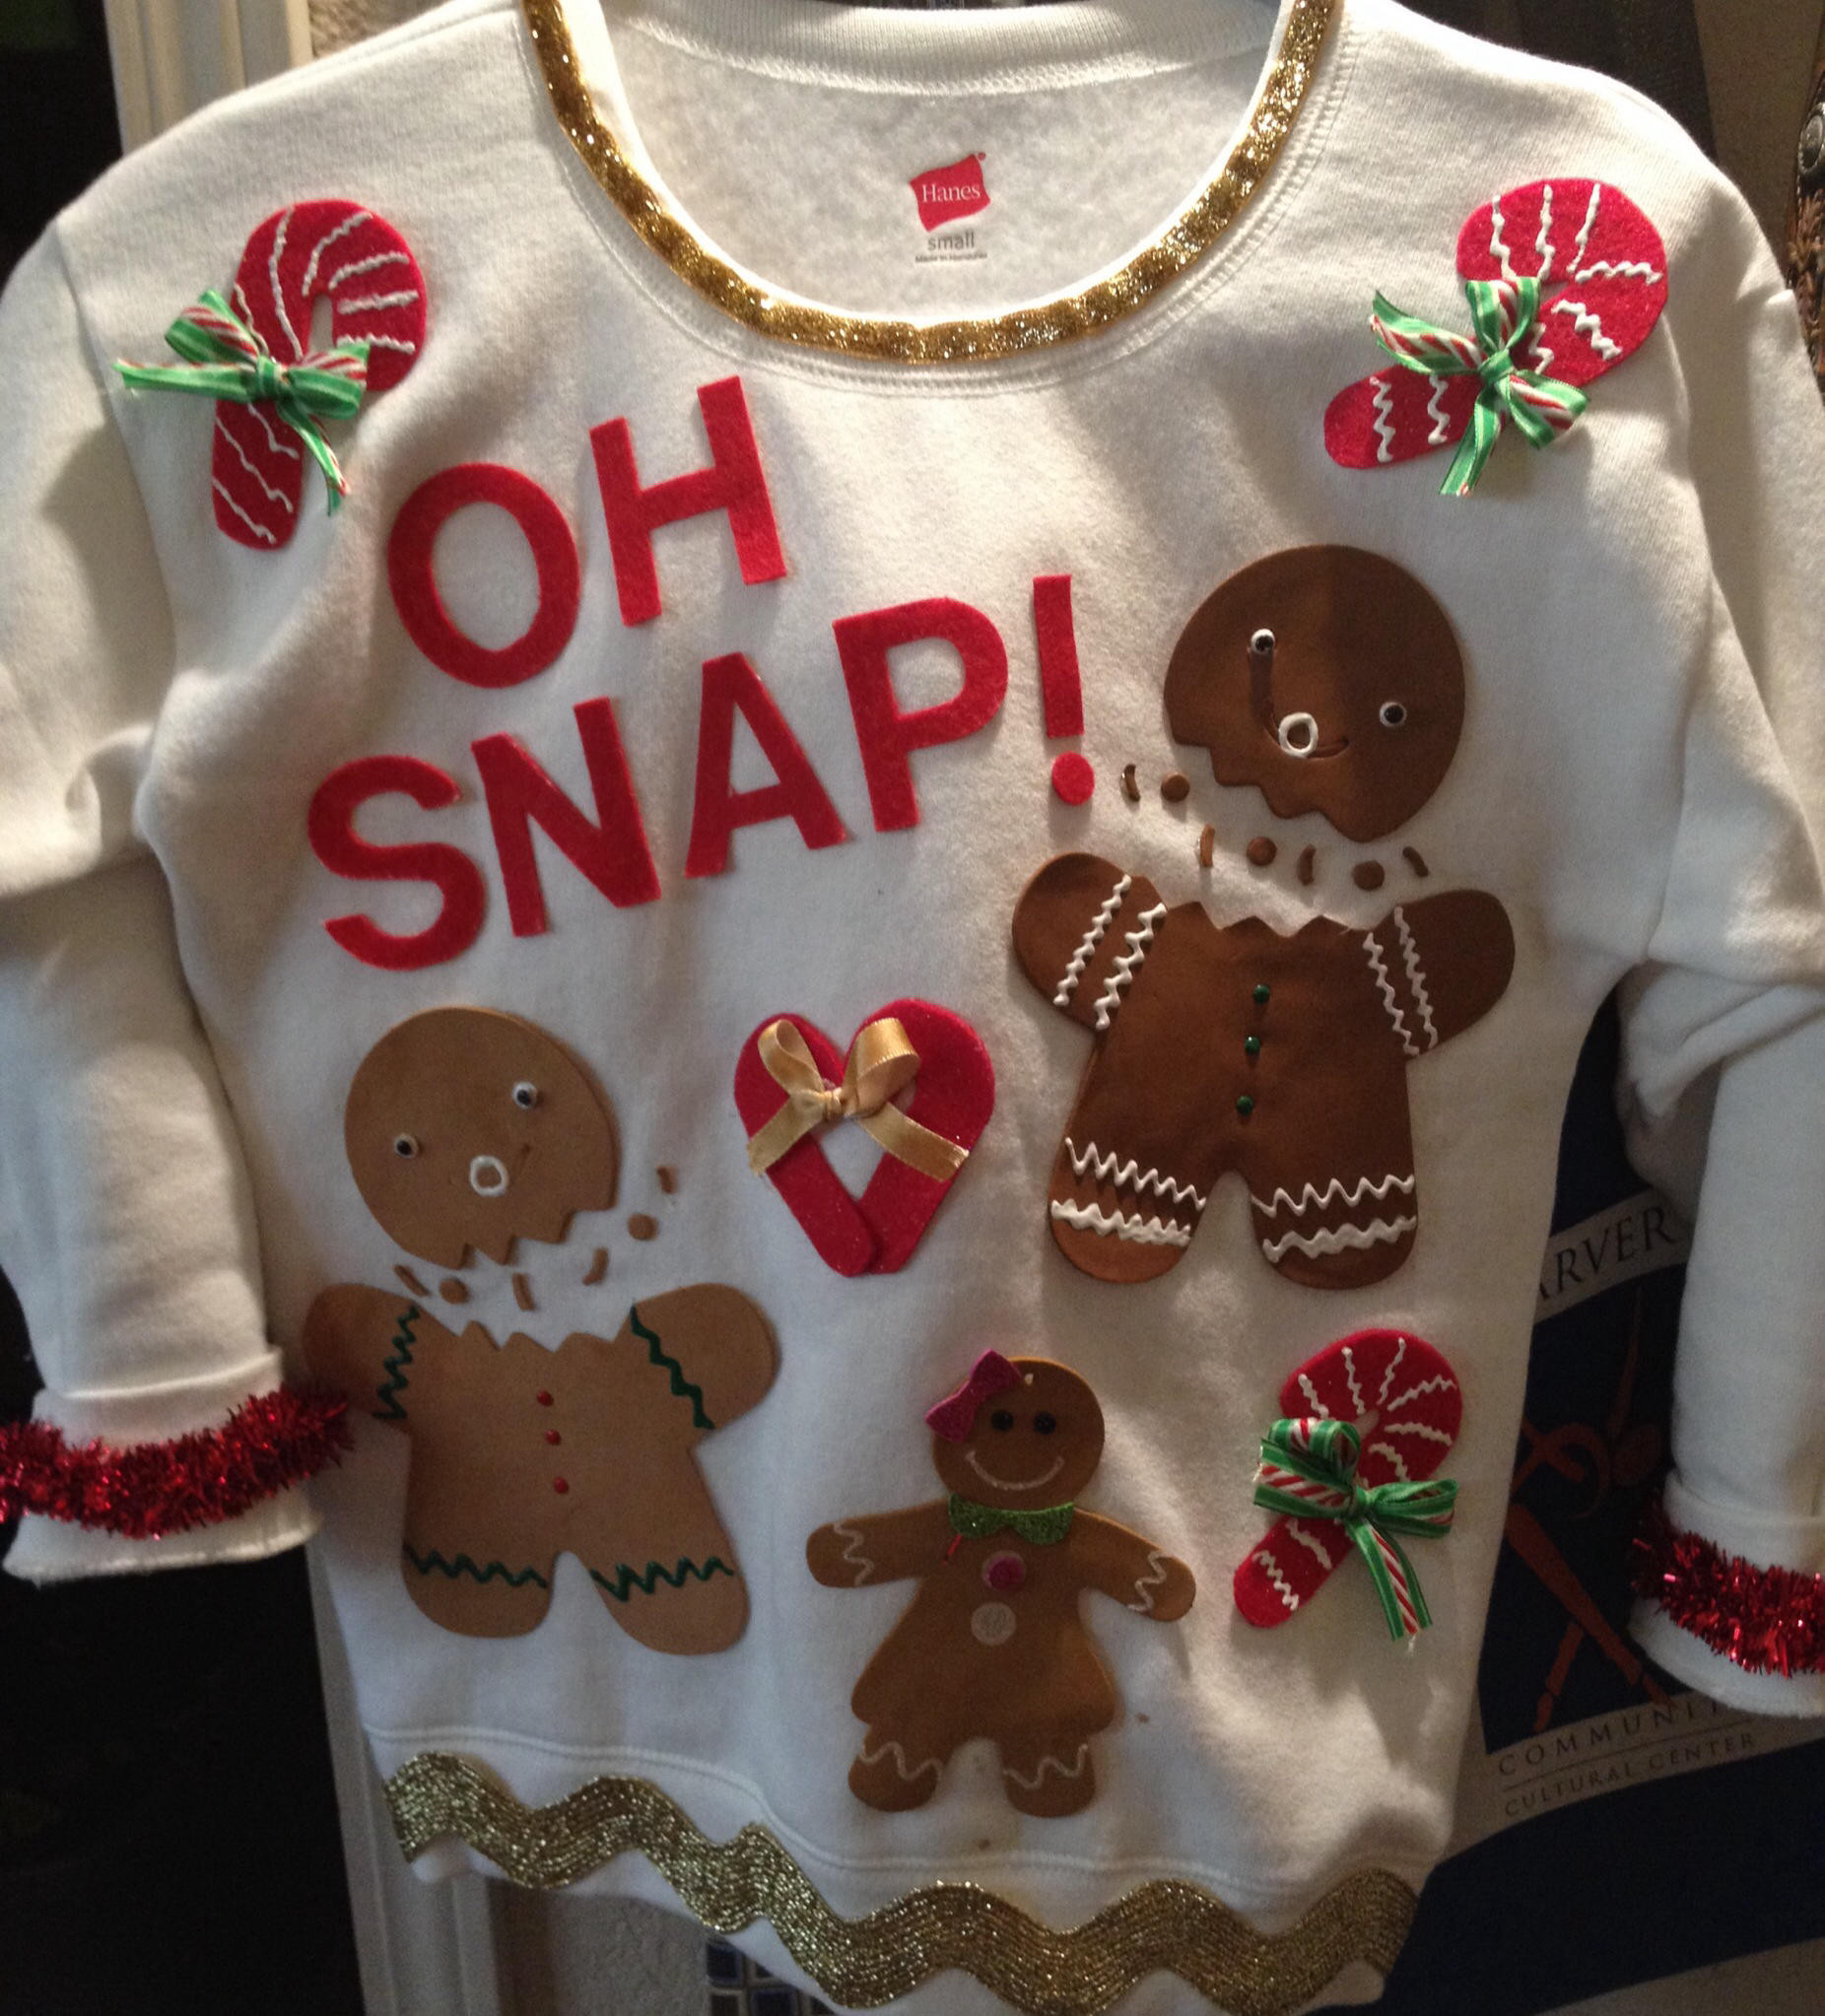 Ugly Sweater Ideas For Christmas Parties
 The Best Ugly Christmas Sweaters and How to Make Your Own